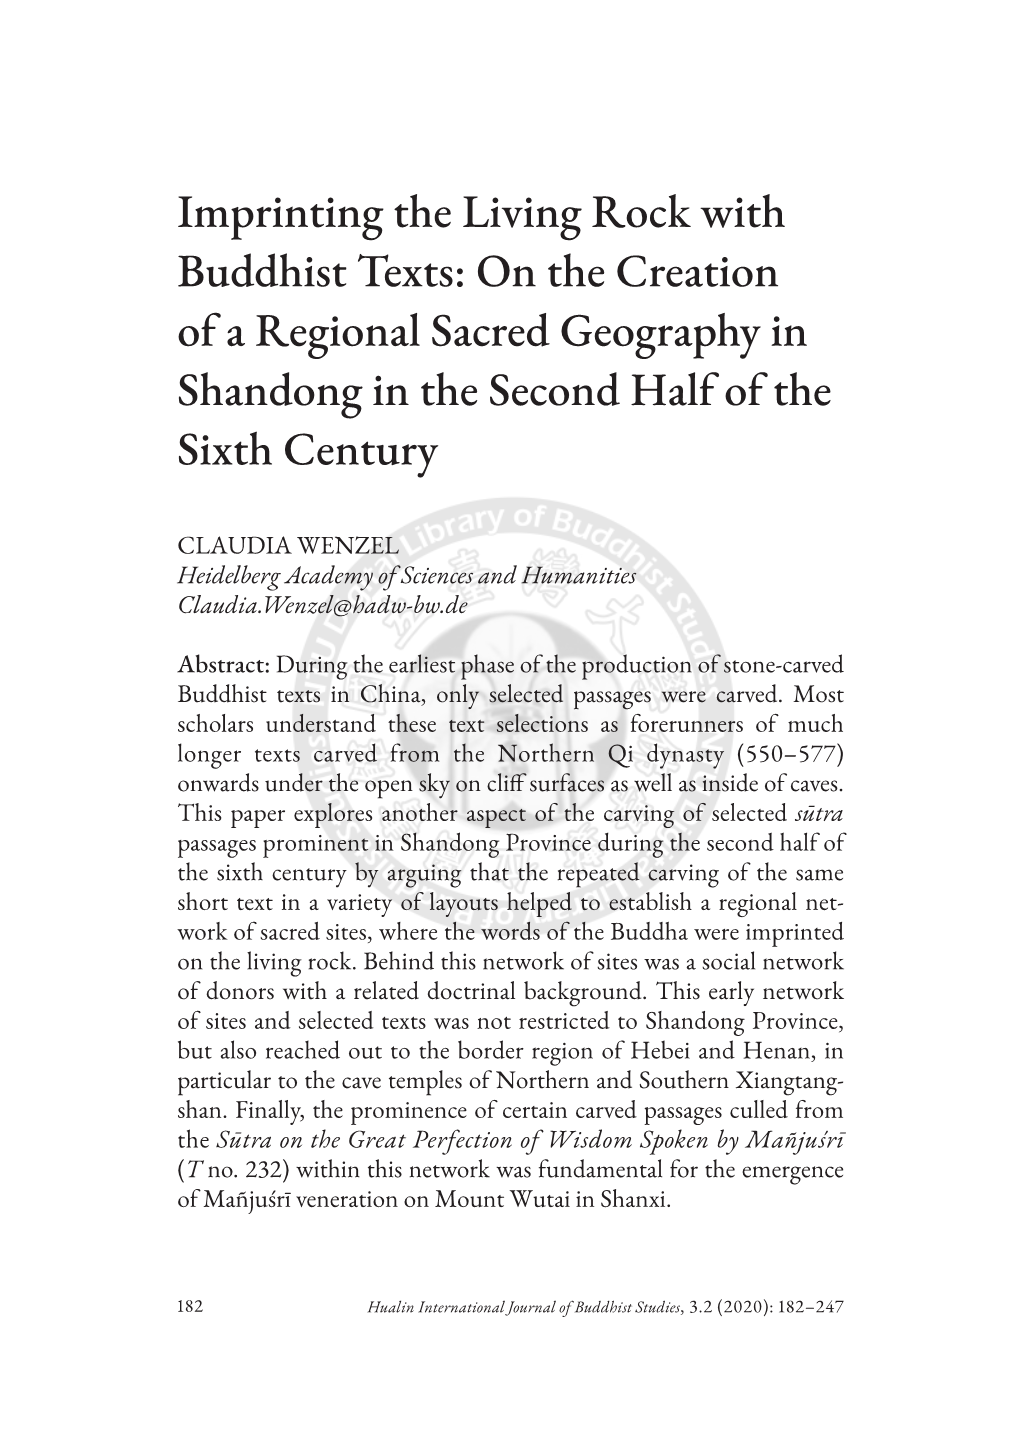 Imprinting the Living Rock with Buddhist Texts: on the Creation of a Regional Sacred Geography in Shandong in the Second Half of the Sixth Century